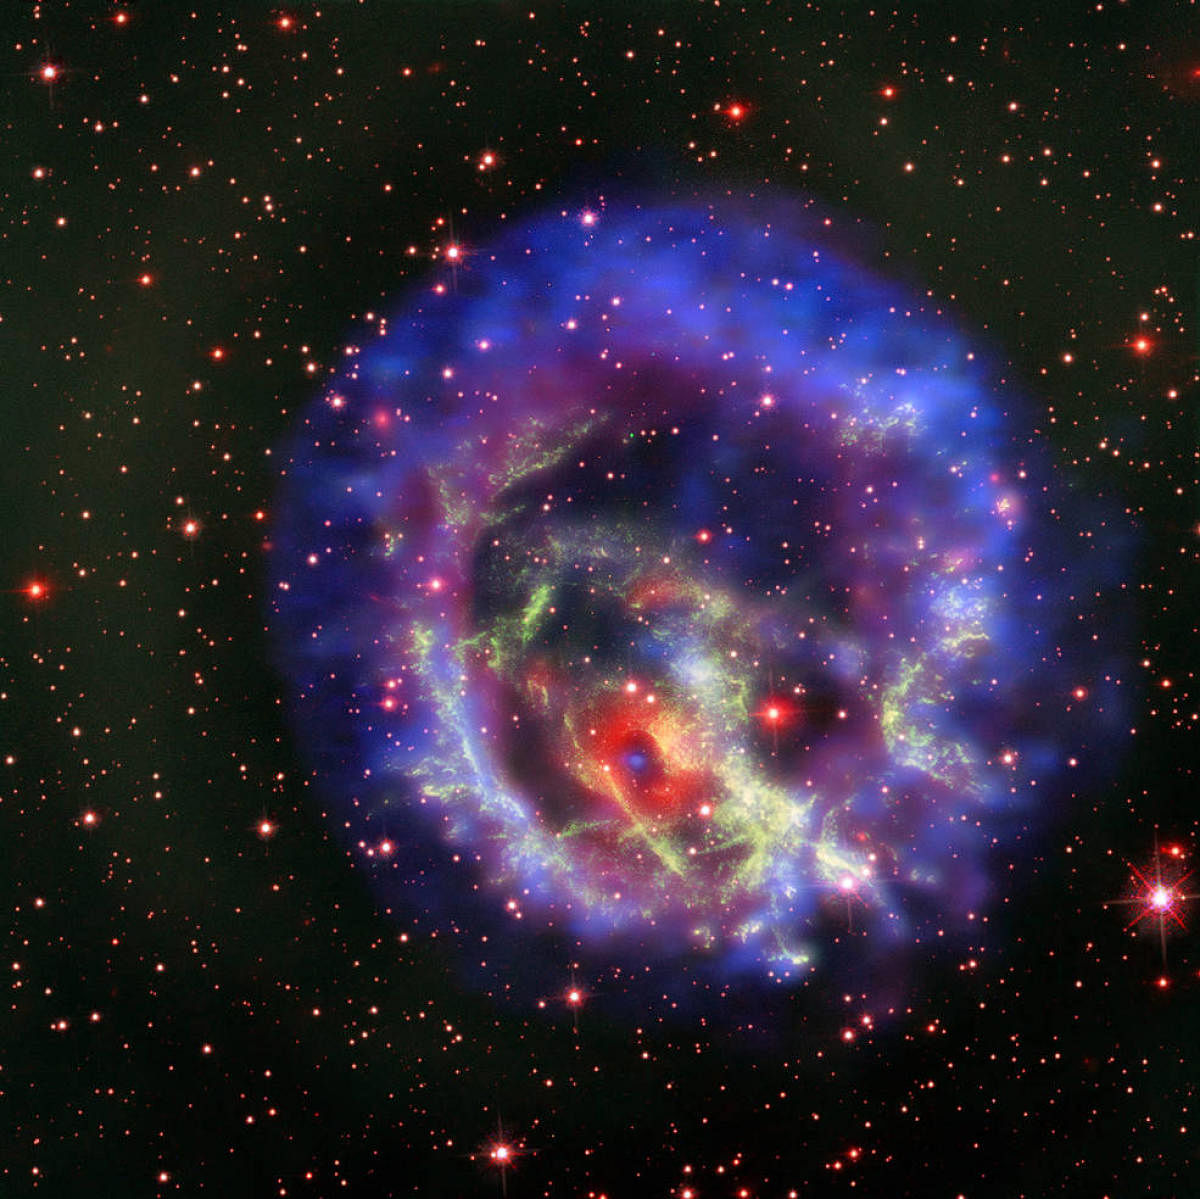 The new composite image of neutron star E0102, released on May 23, combines data from NASA's Chandra X-Ray Observatory (seen in blue and purple), the Multi Unit Spectroscopic Explorer instrument on the European Southern Observatory's Very Large Telescope